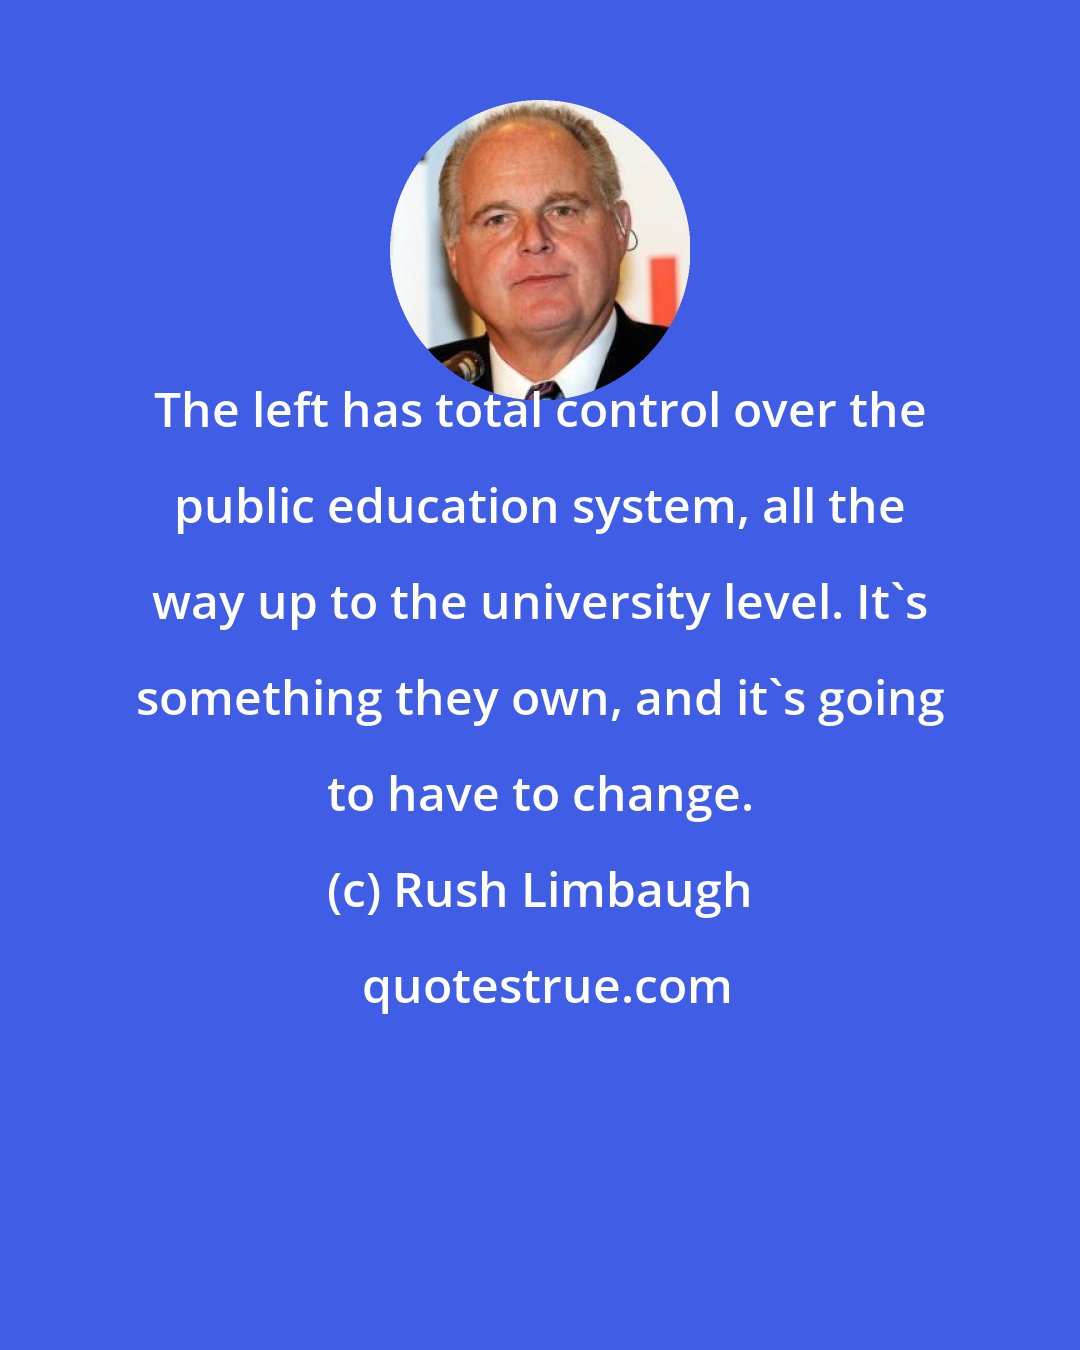 Rush Limbaugh: The left has total control over the public education system, all the way up to the university level. It's something they own, and it's going to have to change.